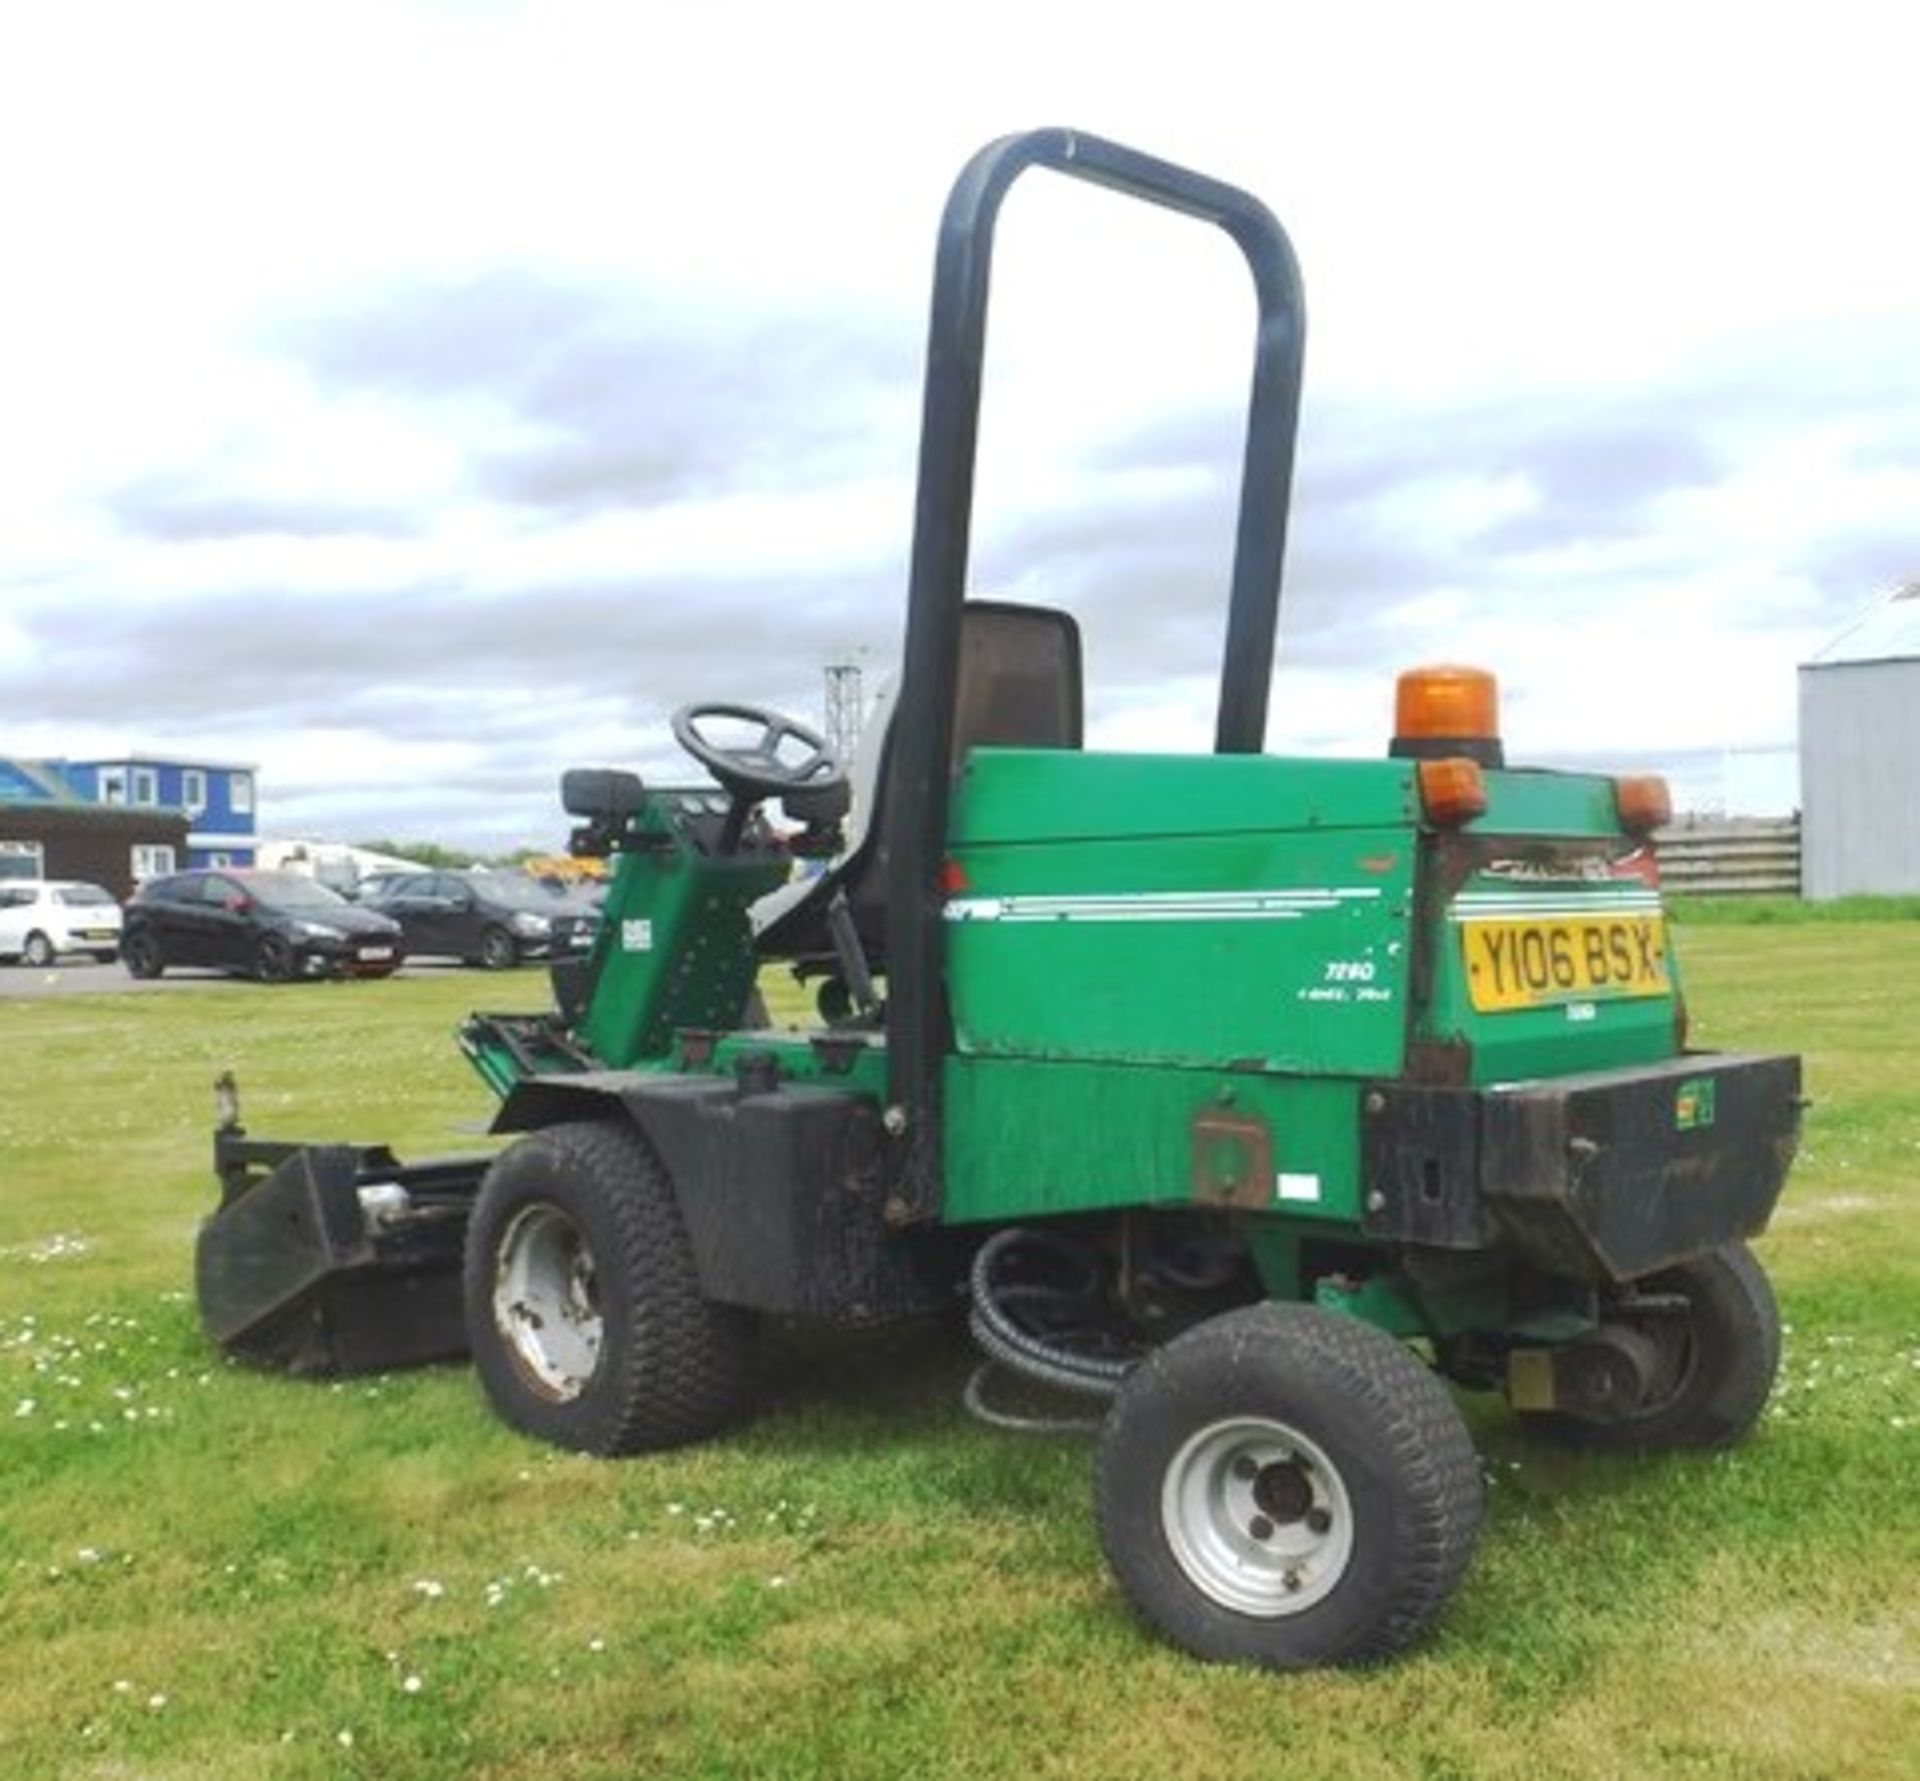 RANSOMES FRONT LINE 7280 ride on mower. Reg - Y106BSX. 4029hrs (not verified) - Image 11 of 13